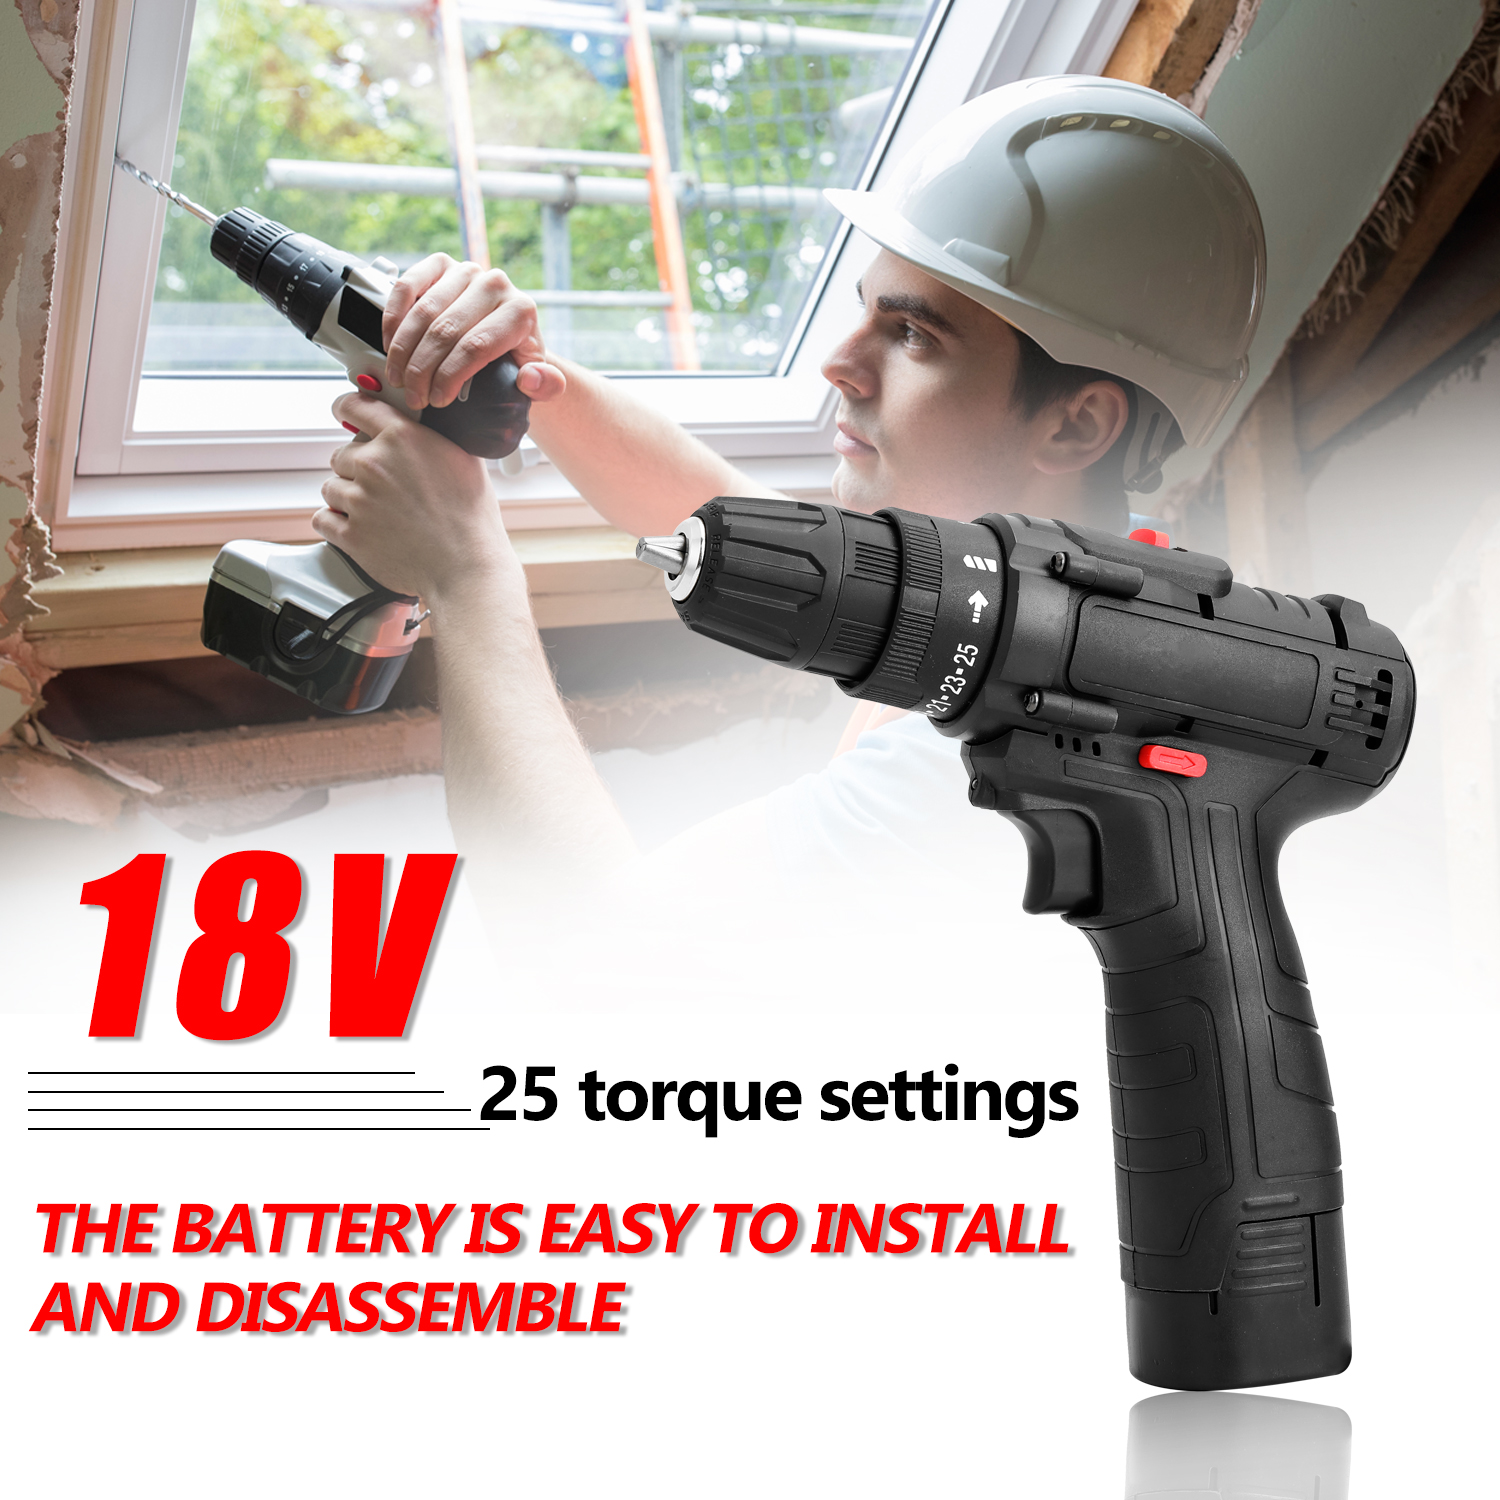 18V Multifunctional Cordless Electric Screwdriver Electric Cordless Drill Power Tools Wireless Rechargeable Hand Drills DIY